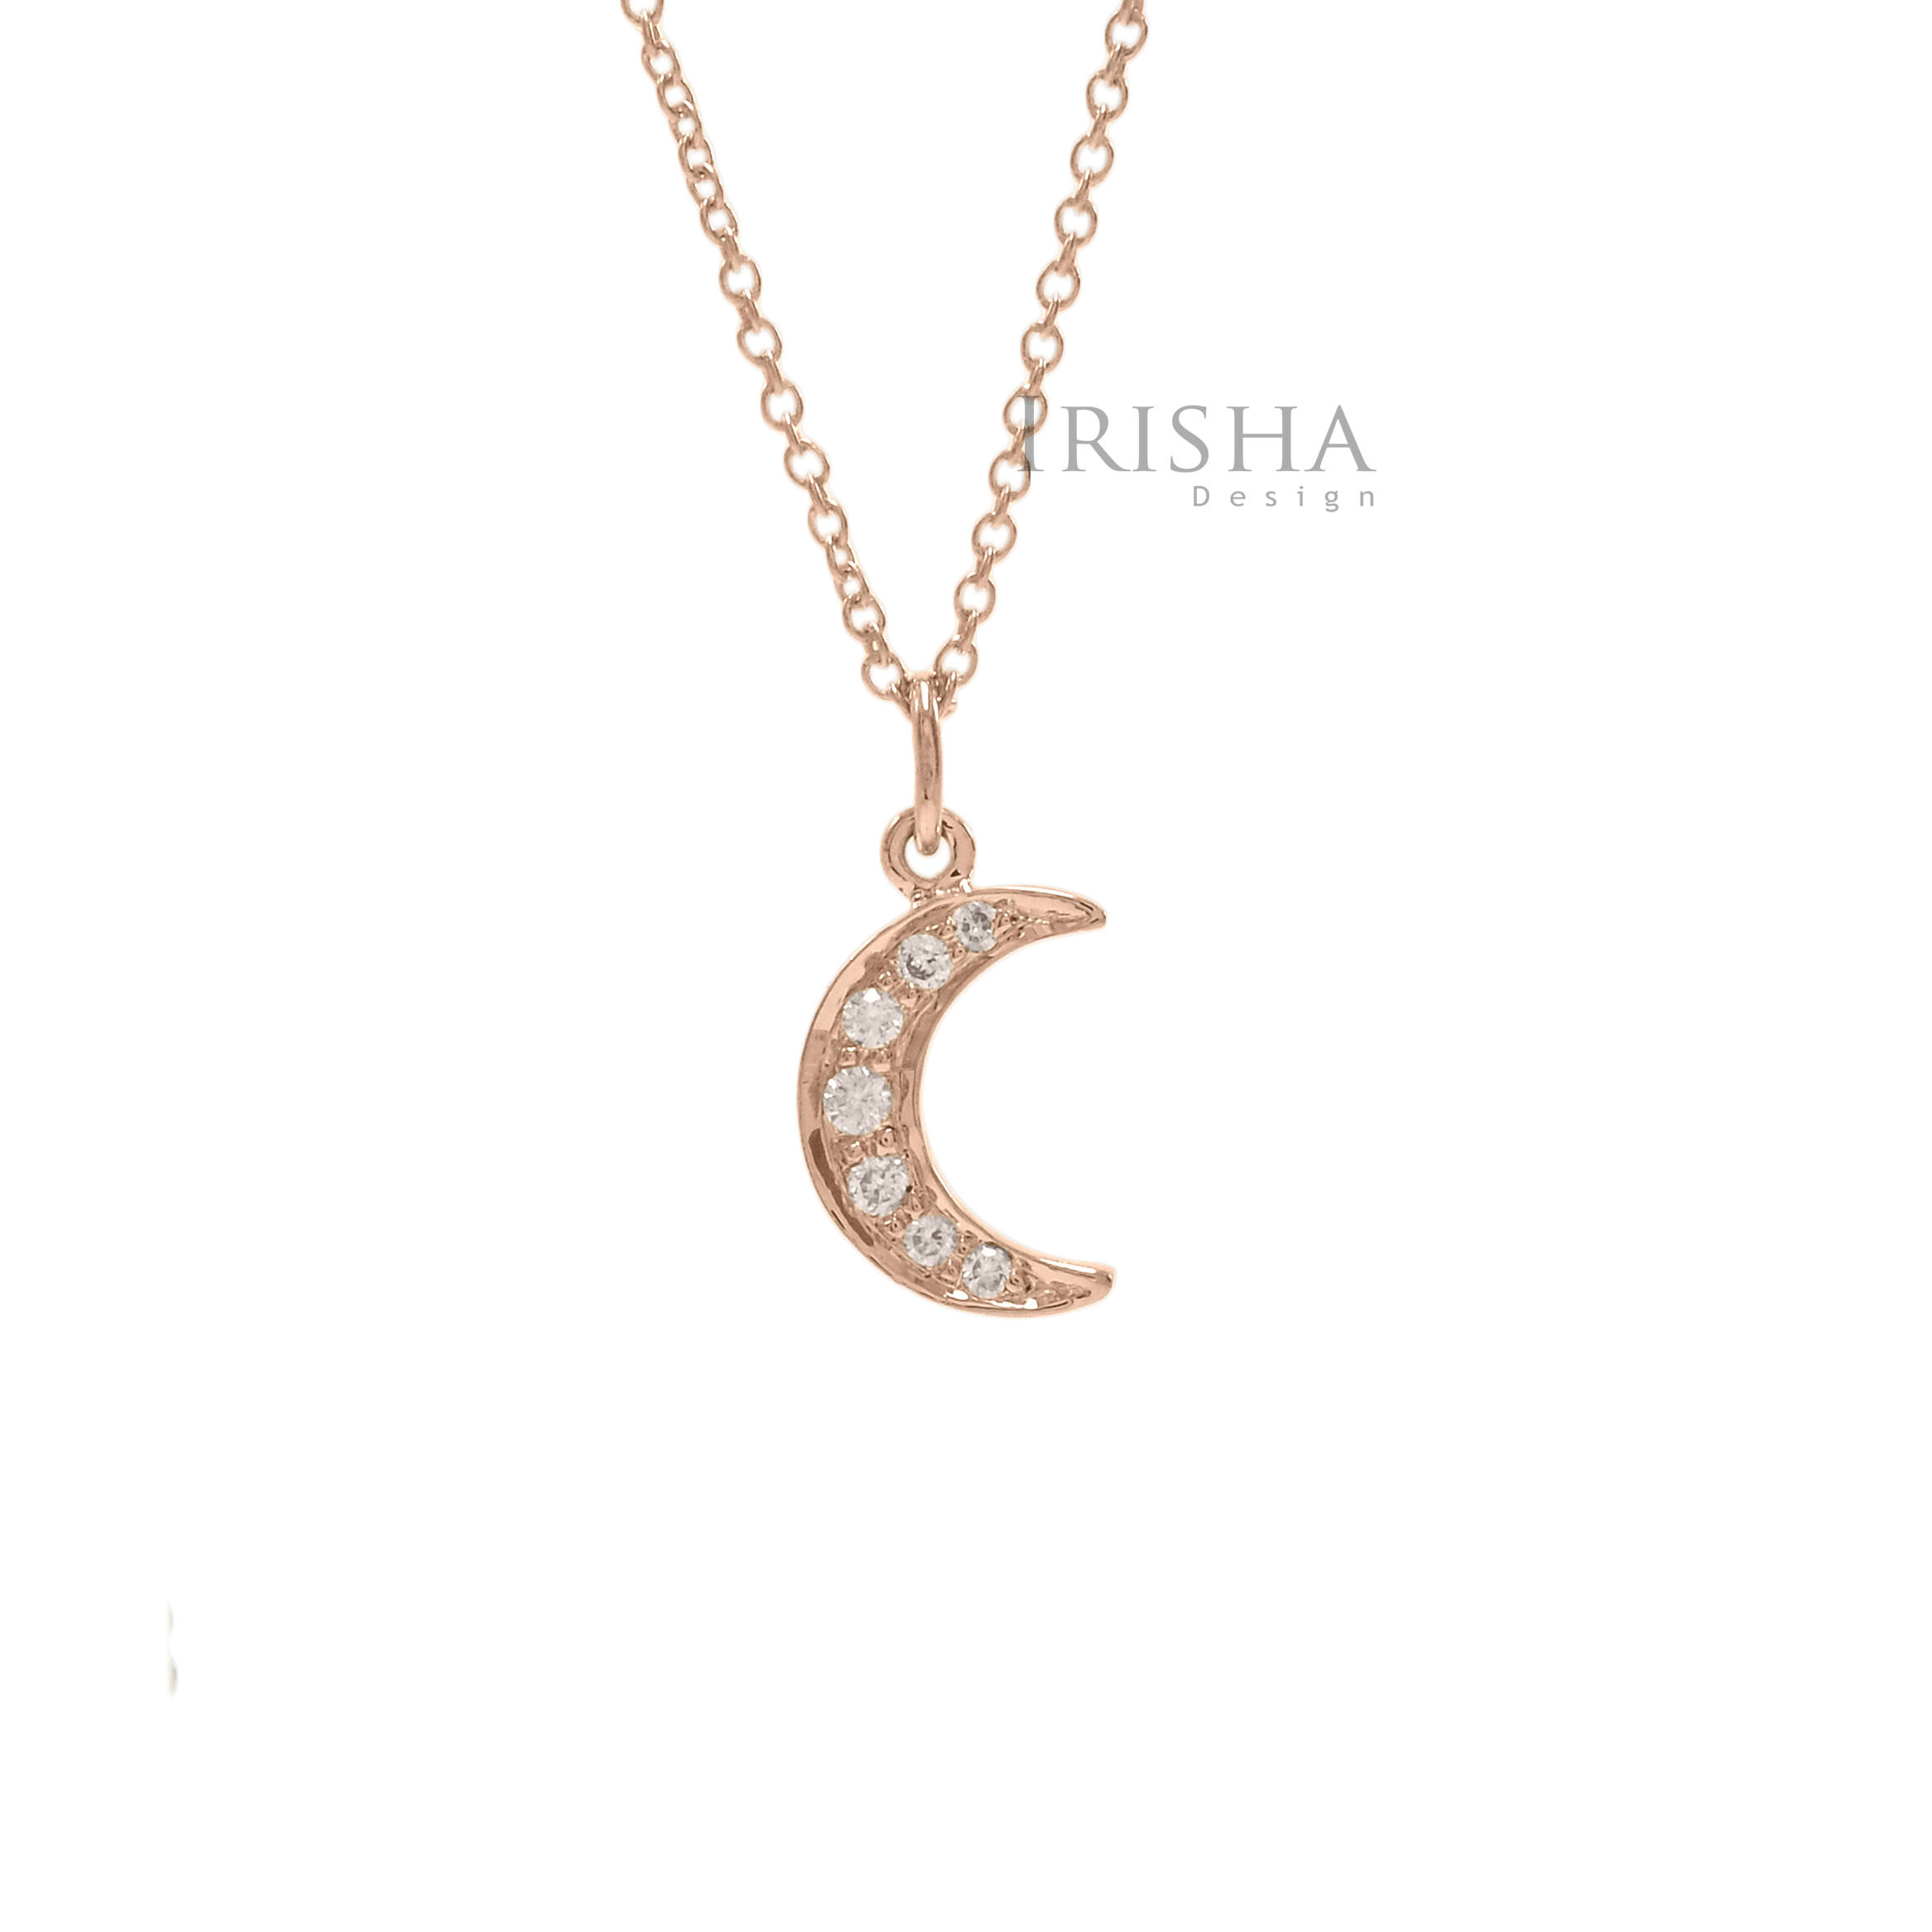 0.09Ct. Real Diamond Crescent Moon Design Necklace in 18K Gold Fine